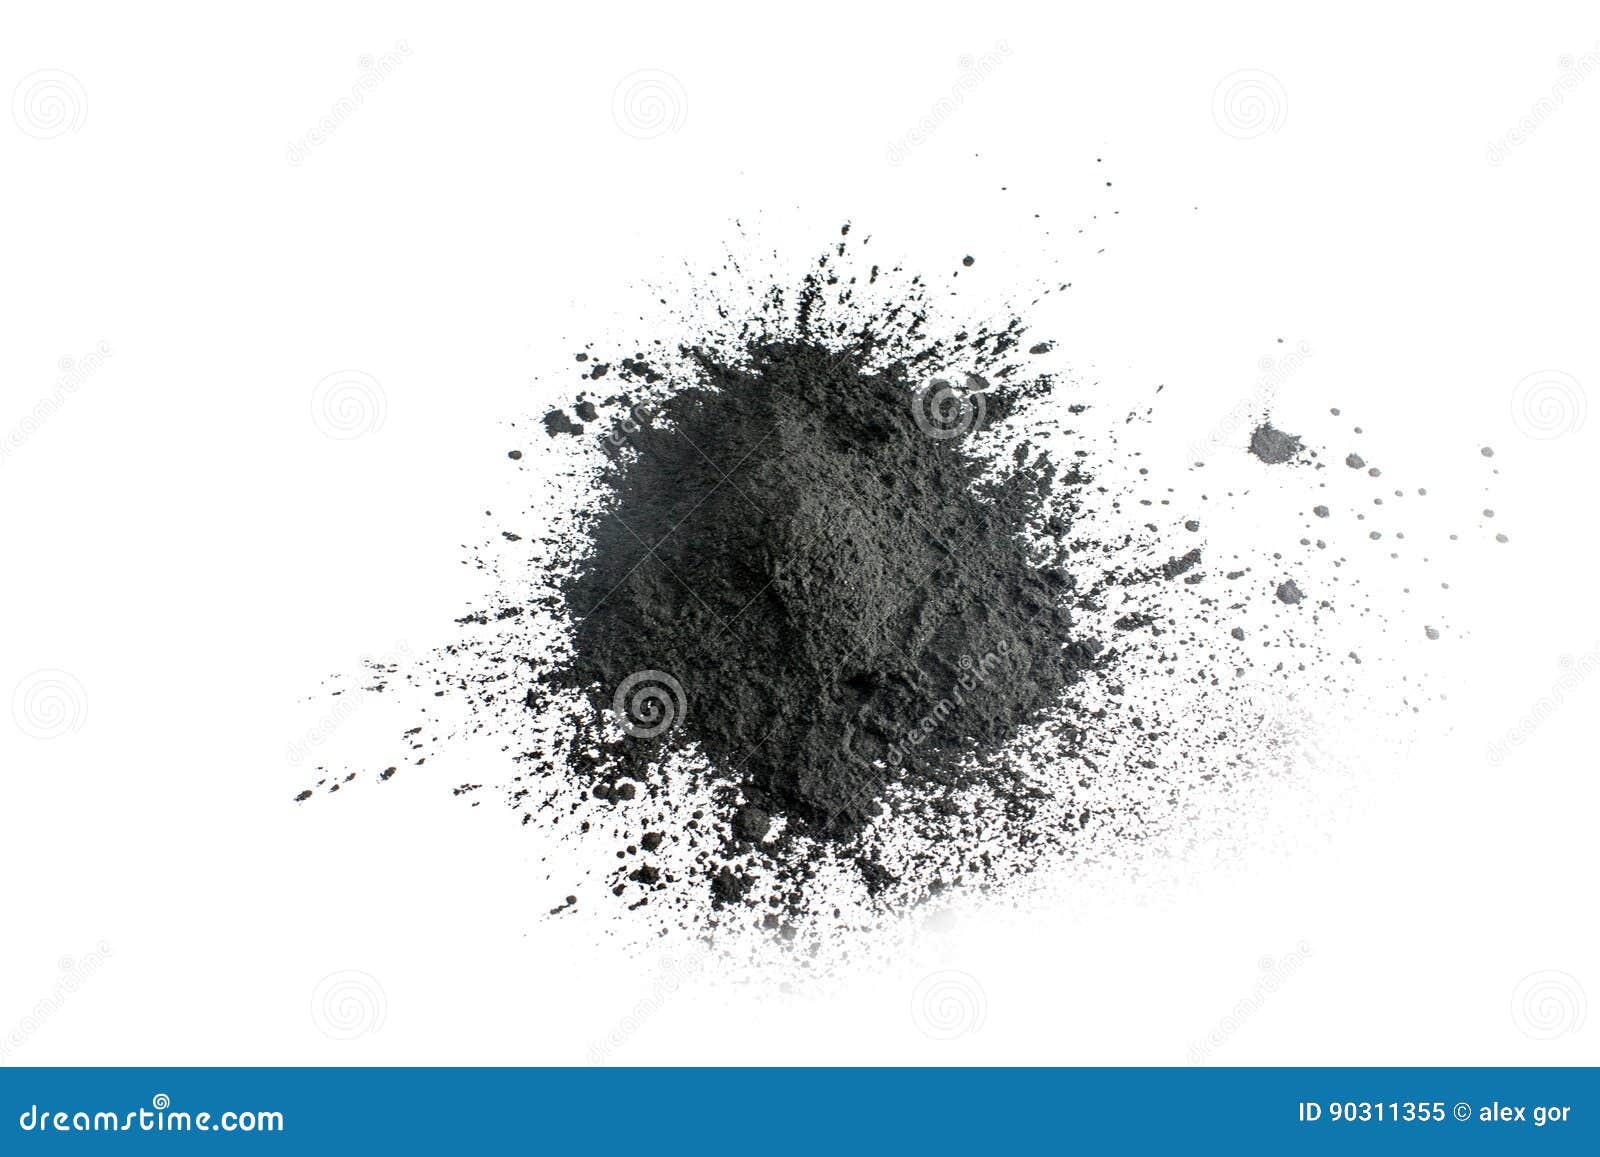 activated charcoal powder shot with macro lens